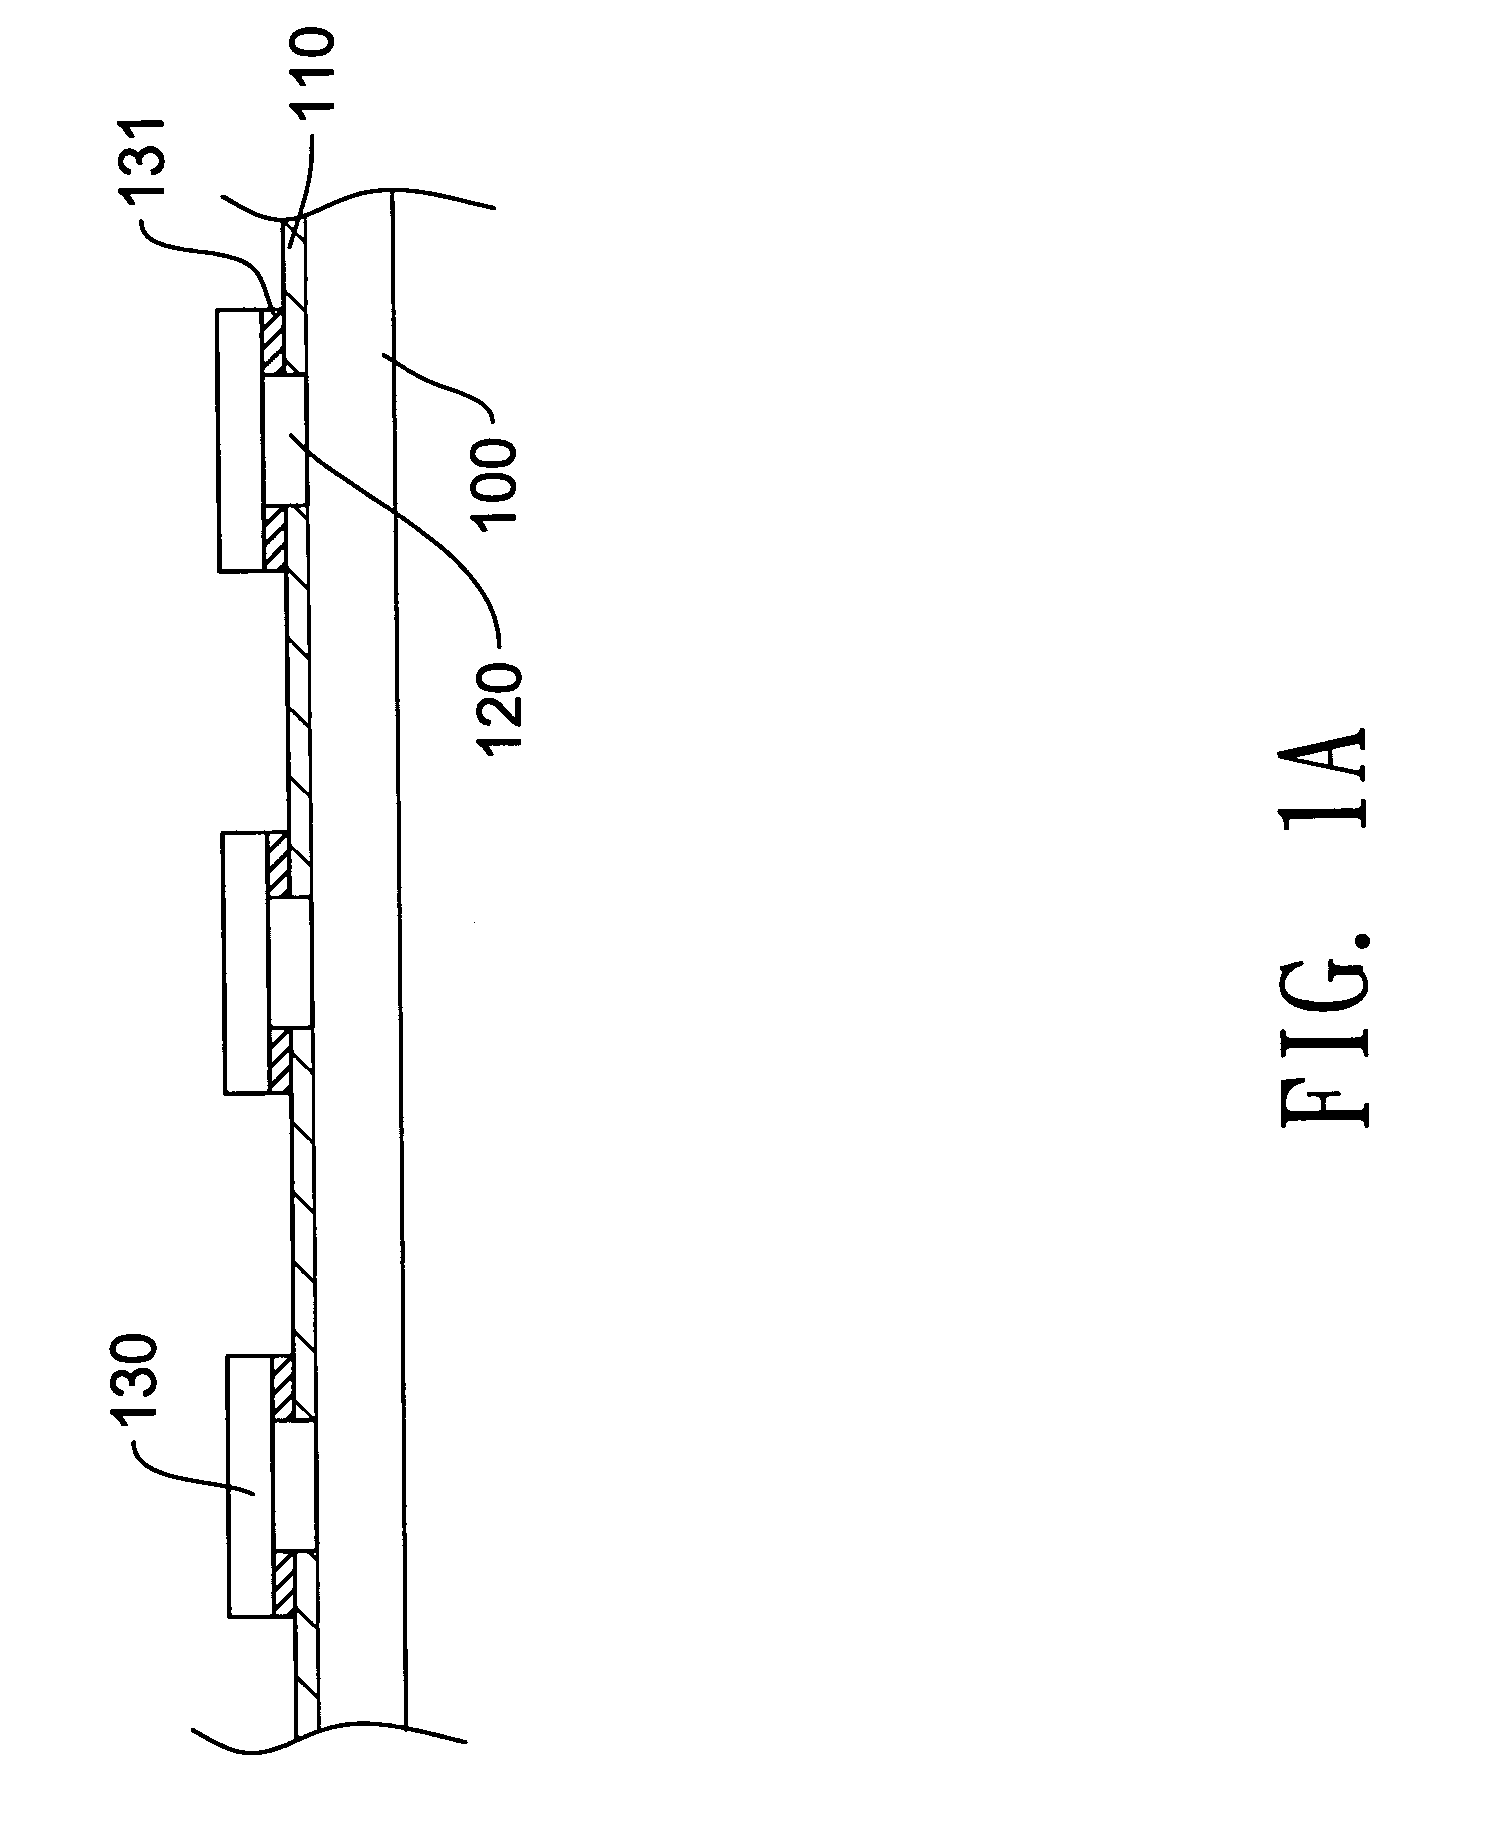 Plane structure of light-emitting diode lighting apparatus